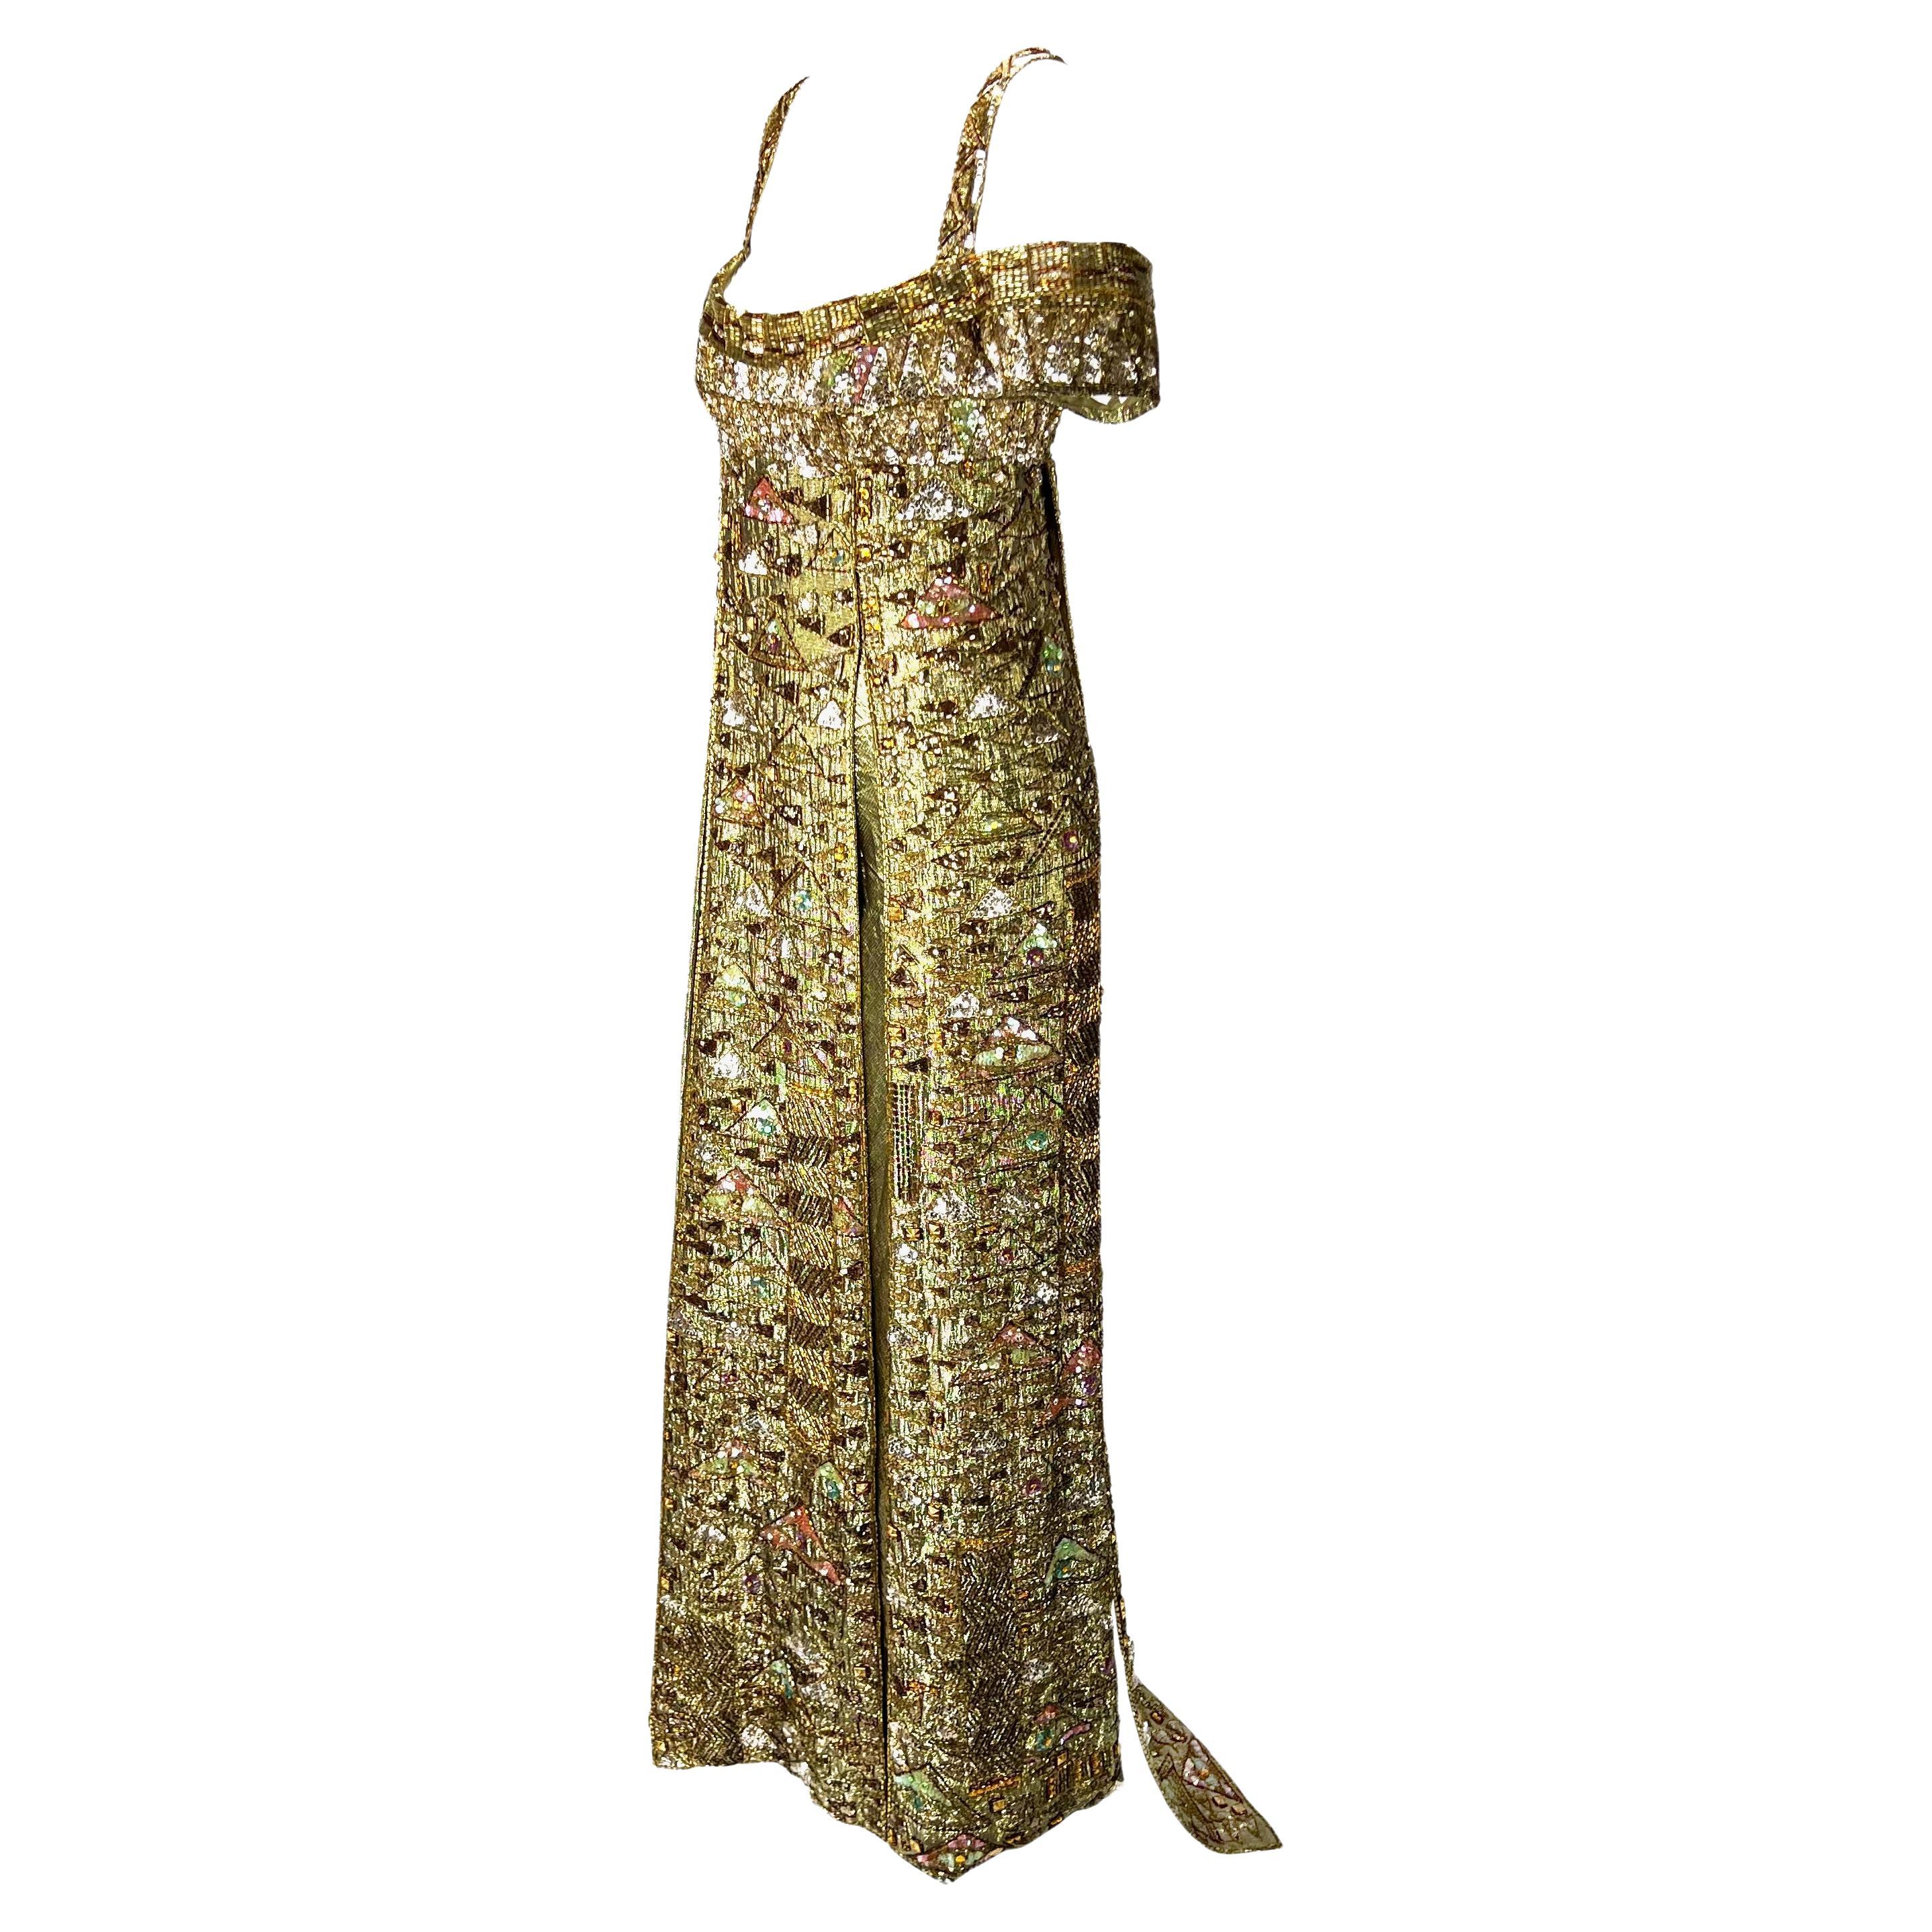 1984 Ray Aghayan for Barbra Streisand Custom Klimt Beaded Gold Lame Dress In Good Condition For Sale In West Hollywood, CA